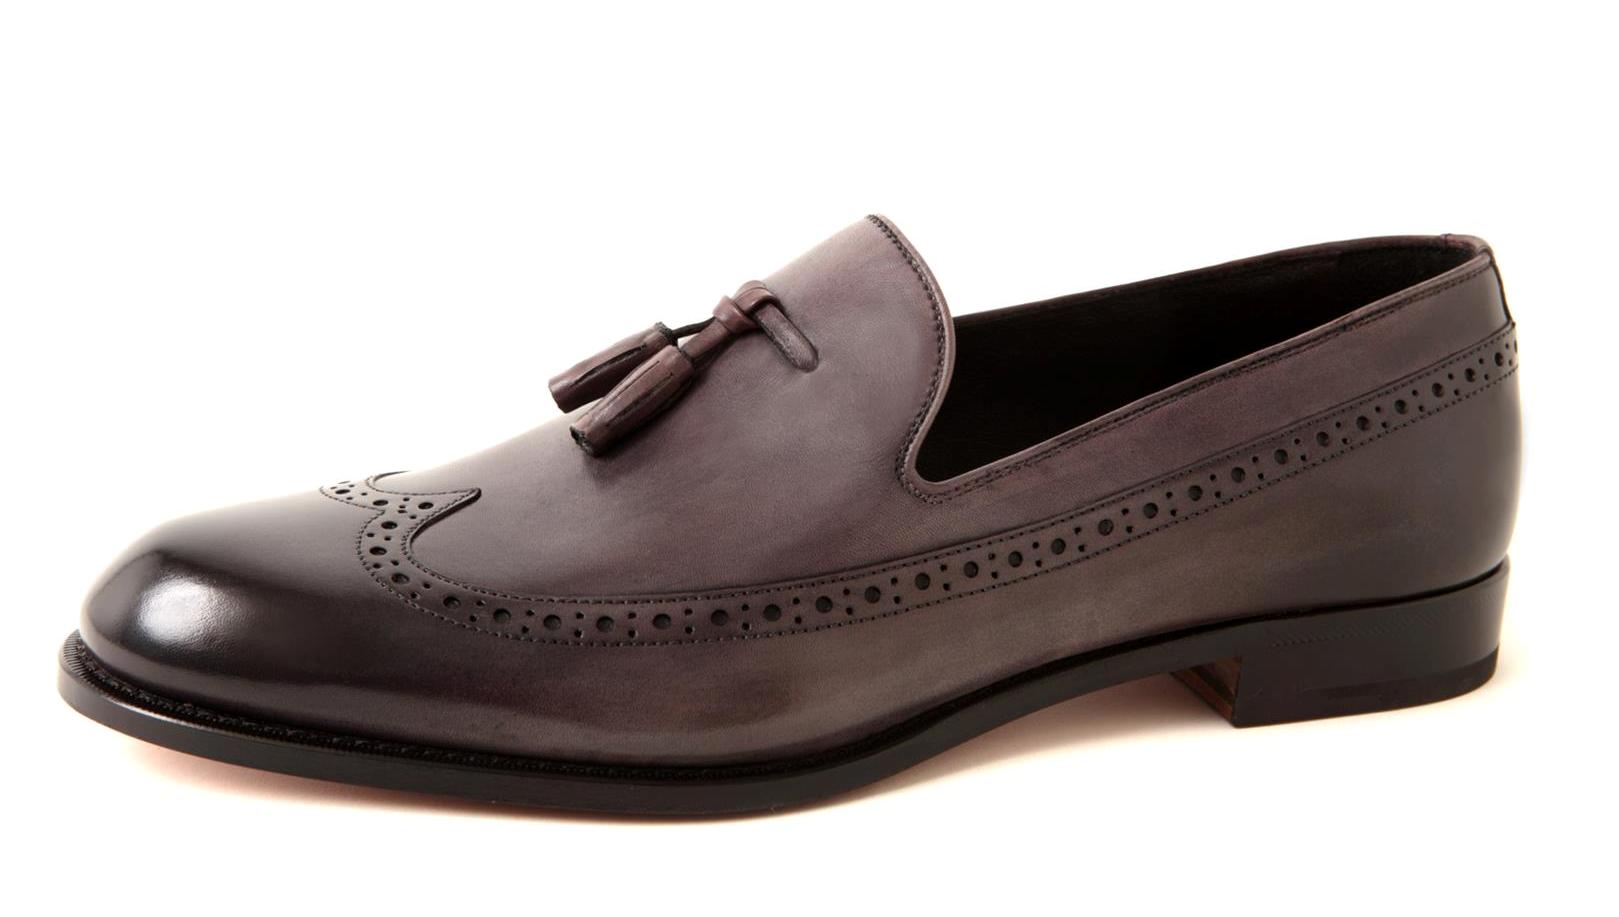 Top 10 Best Leather Shoes Brands in 